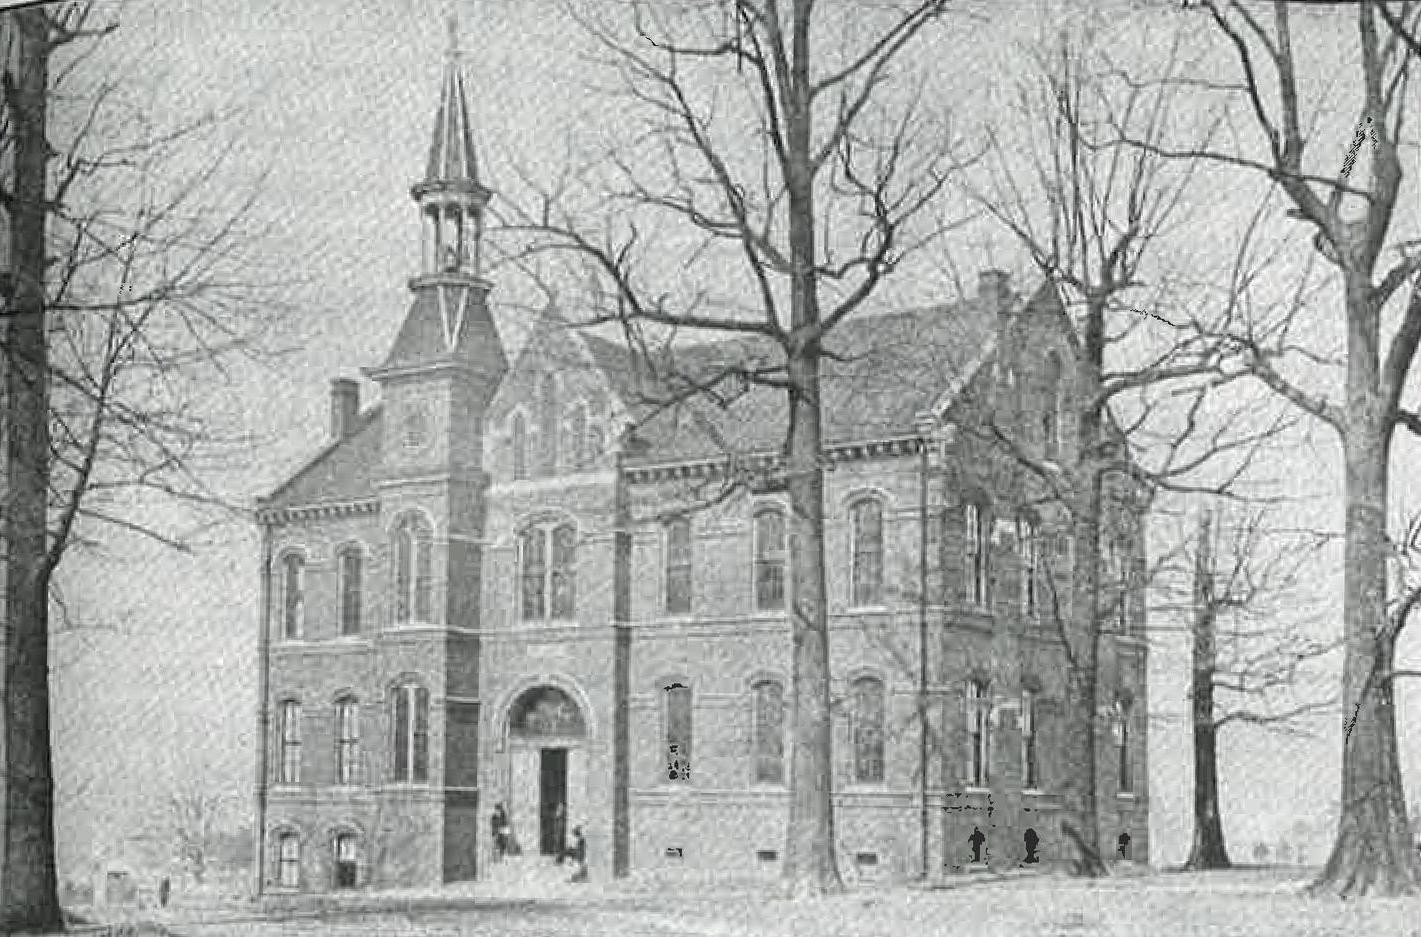 The Stewart Building, named for William M. Stewart, contained the library, laboratories and lecture halls after construction was finished in 1879.